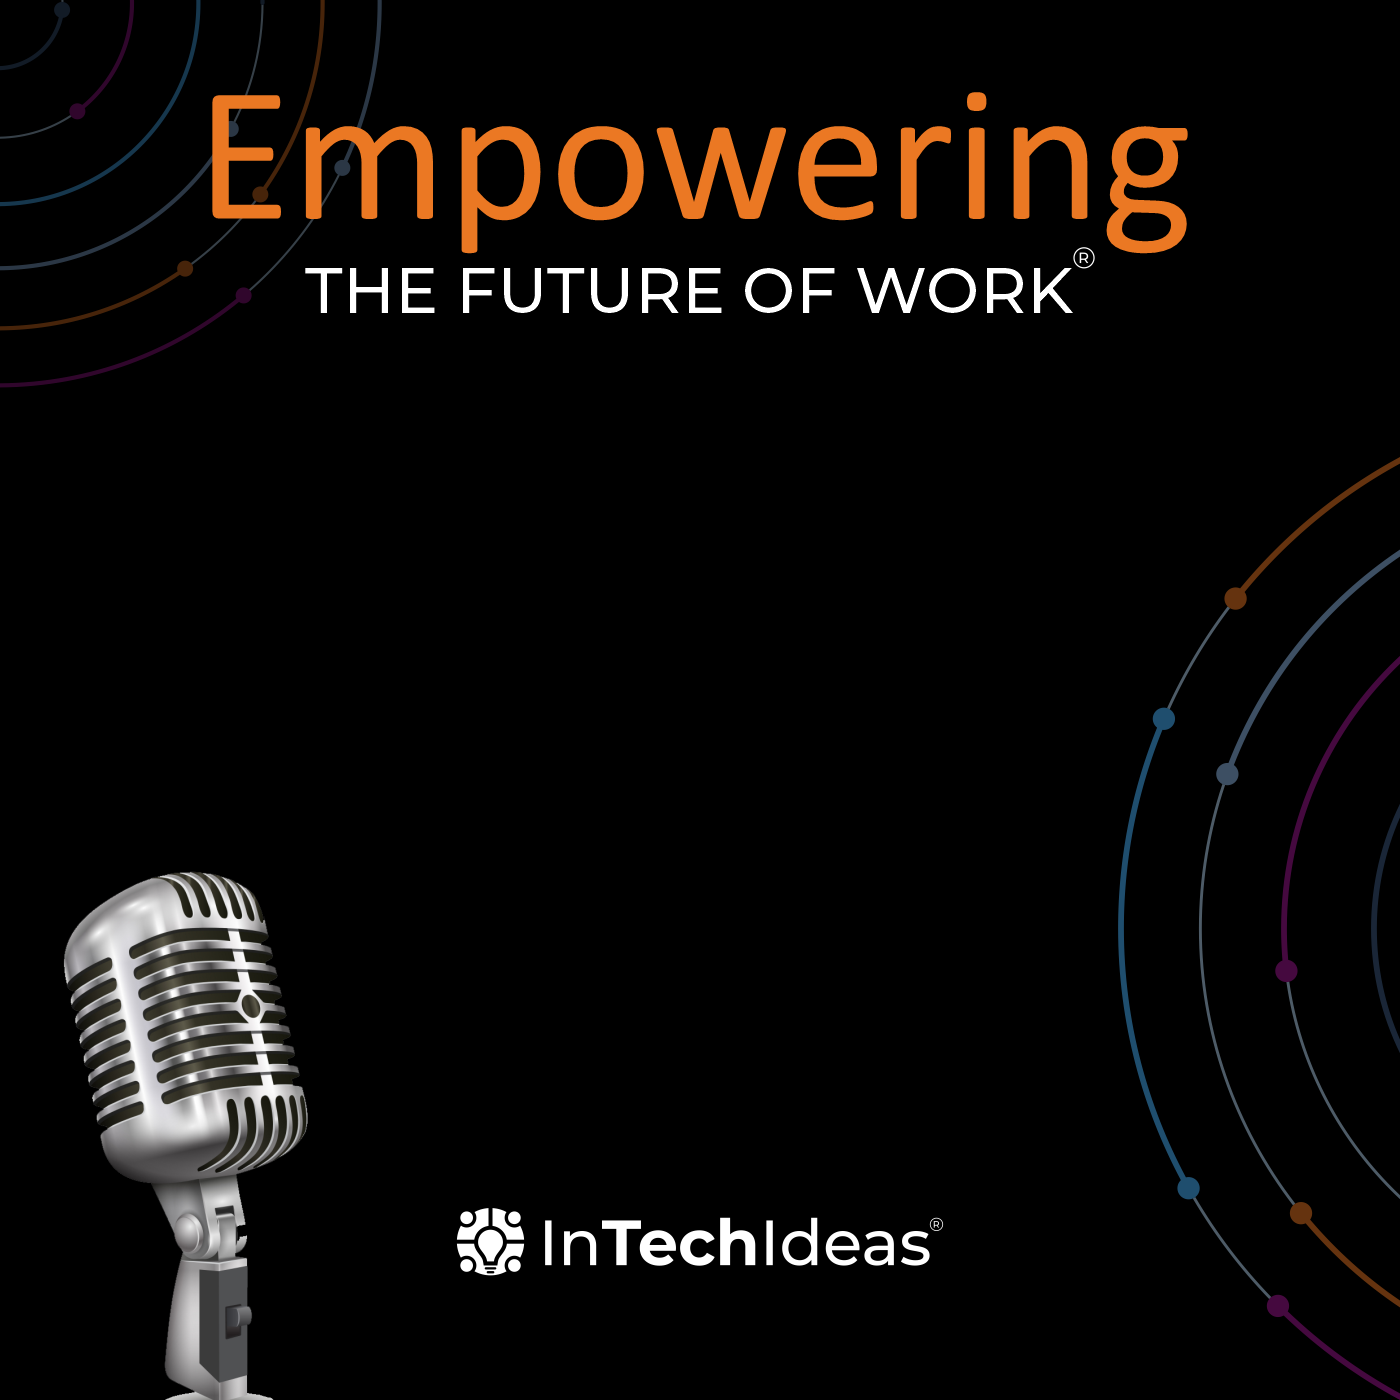 Empowering the Future of Work